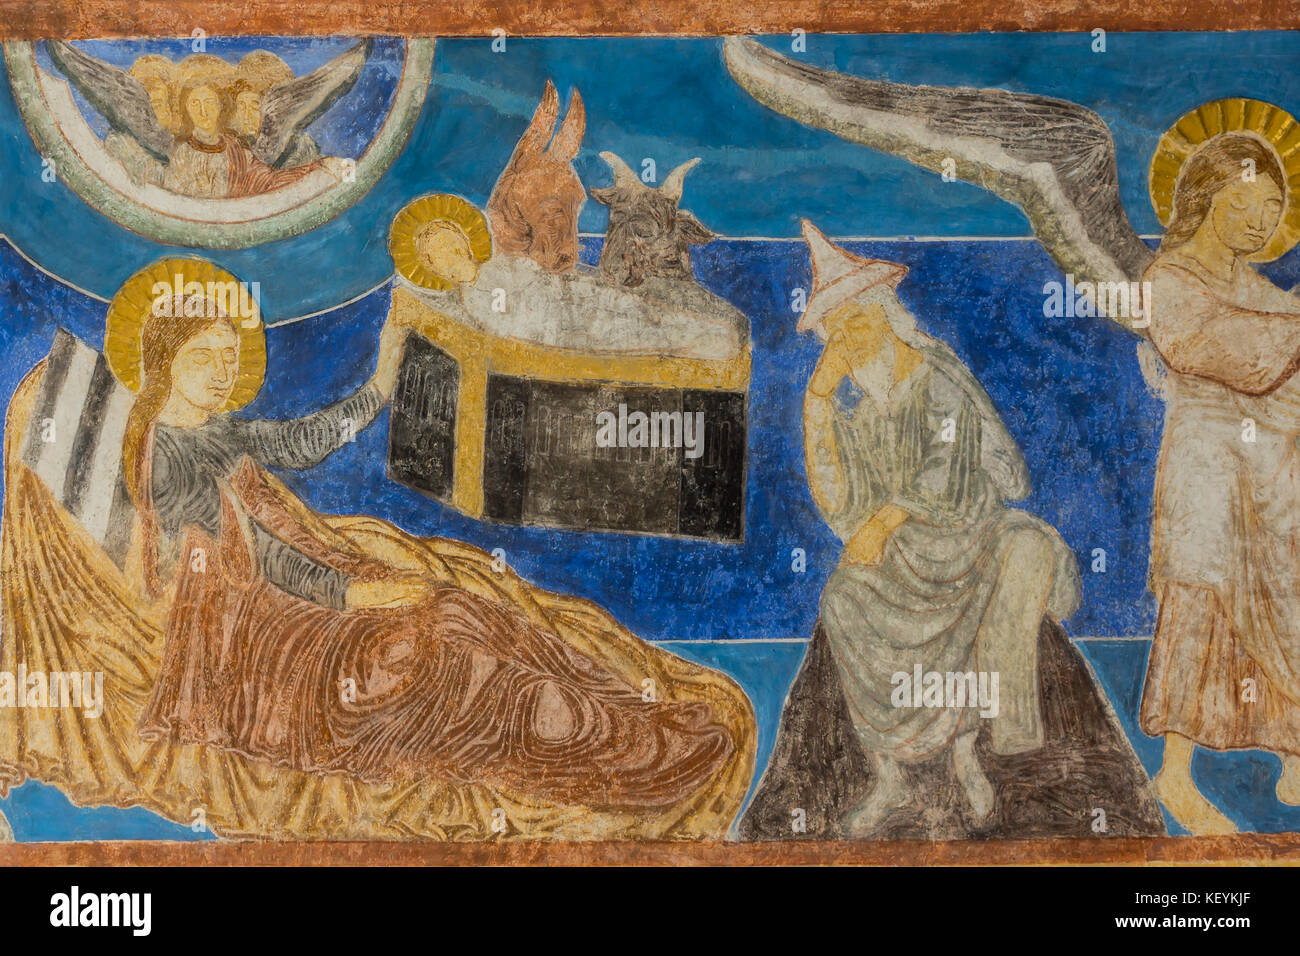 The birth in the stable, Christmas fresco in a medieval church. Bjaresjo, Sweden, September 4, 2014 Stock Photo